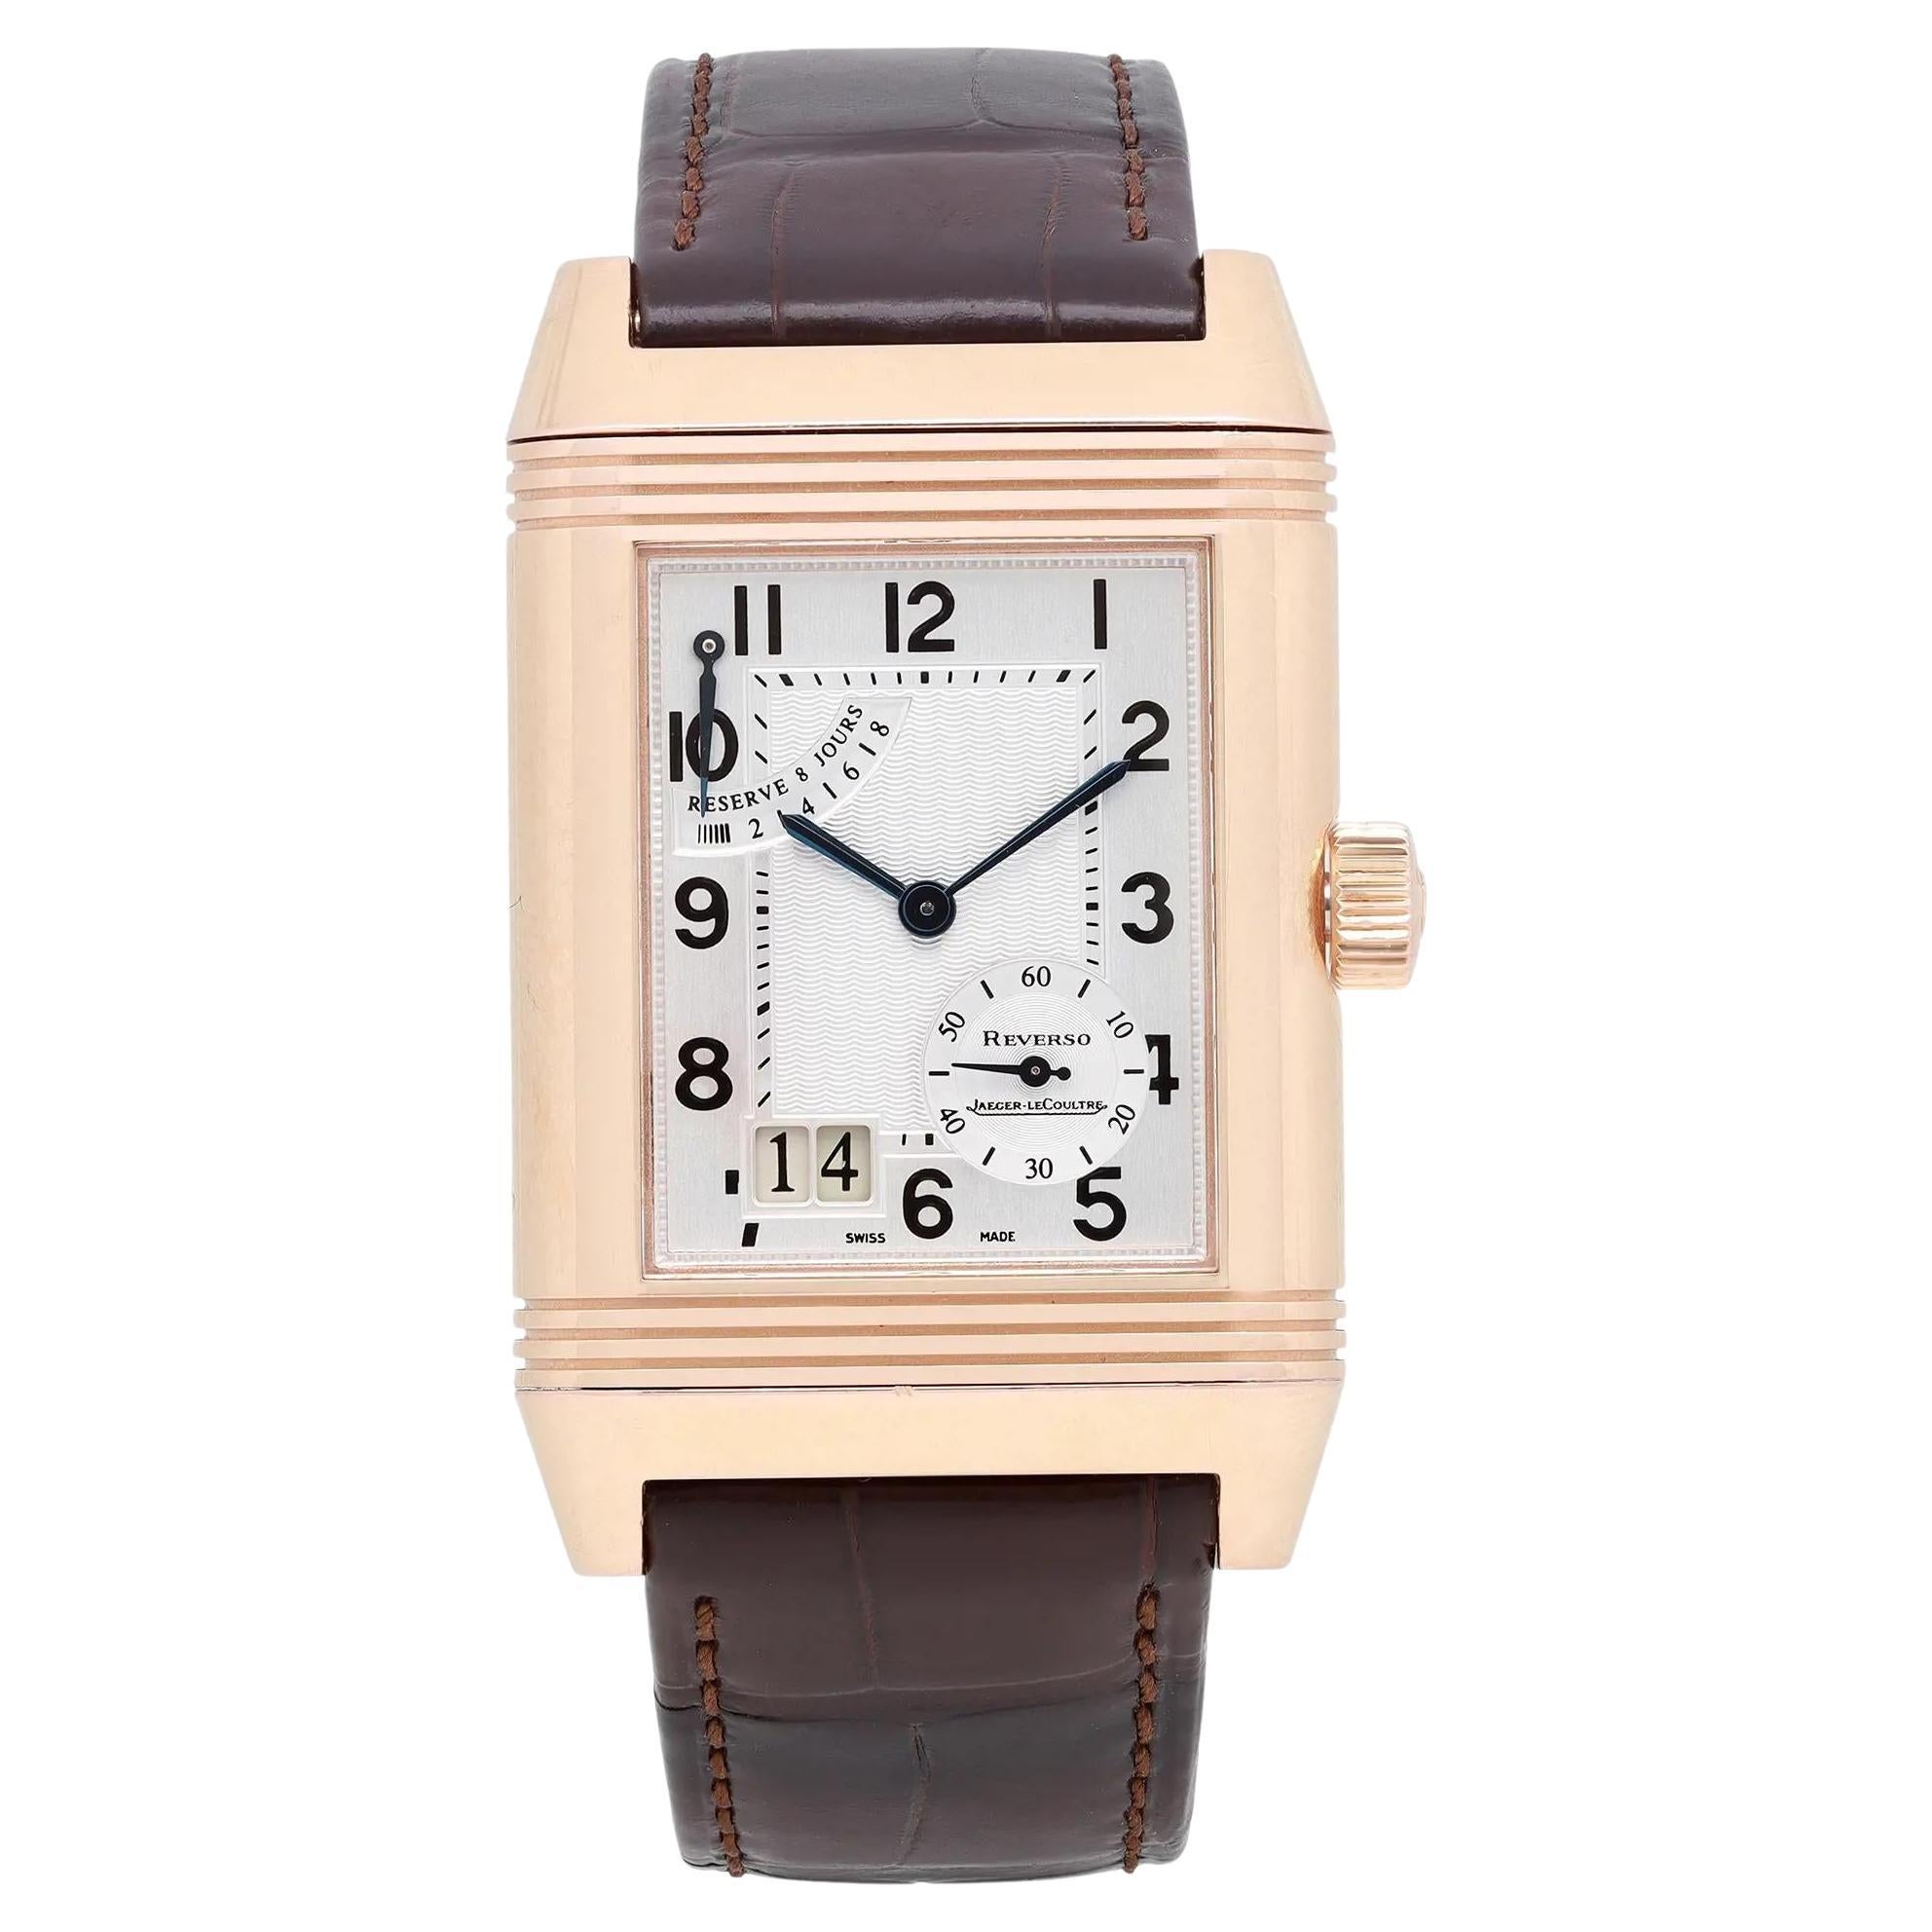 Jaeger-LeCoultre Reverso Grande 18k Rose Gold Silver Dial Watch Q300240